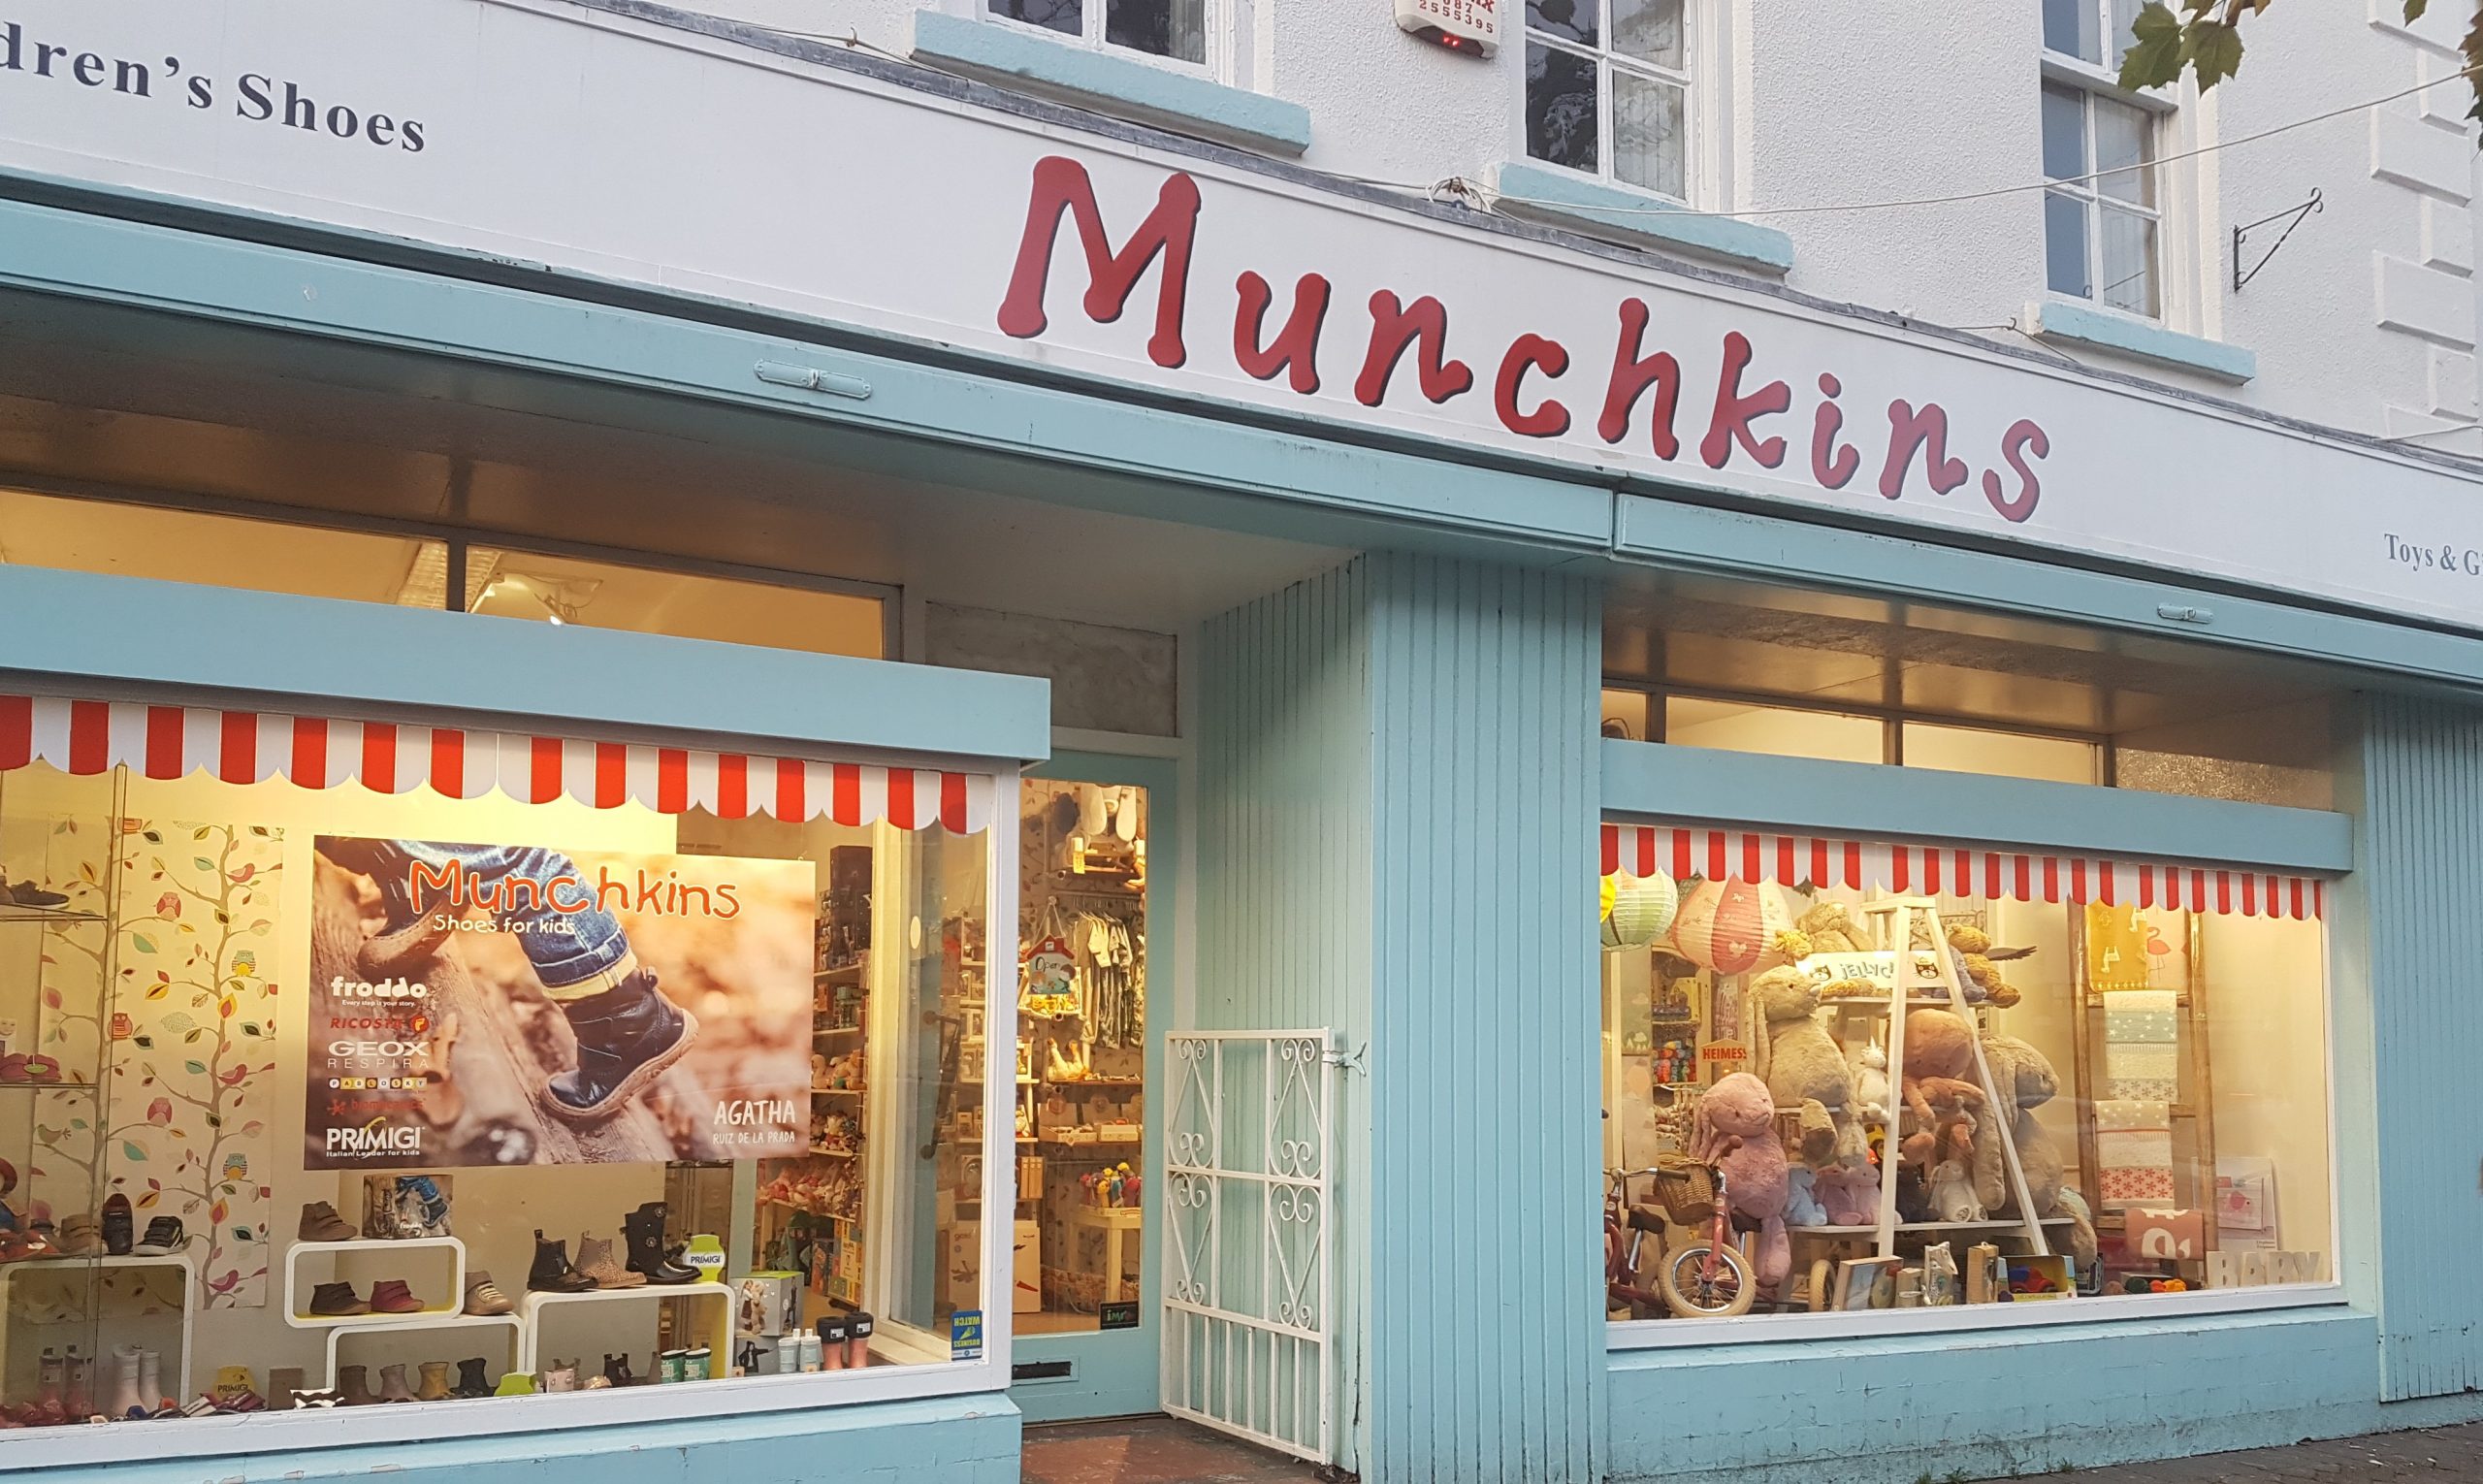 MUNCHKINS Toys & Shoes